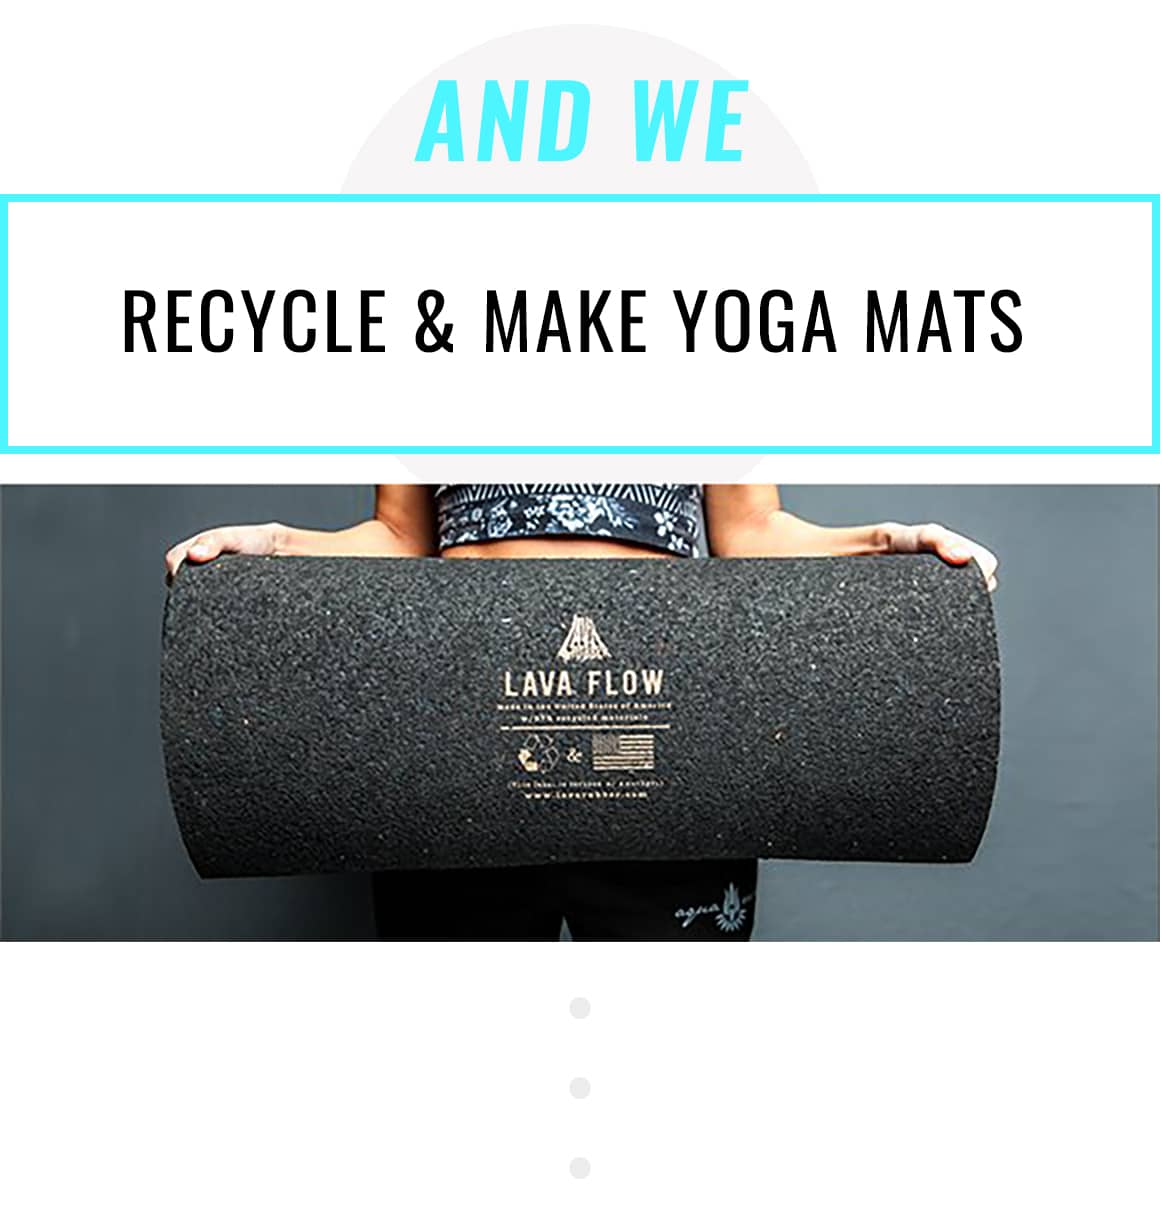 Recycled yoga mats